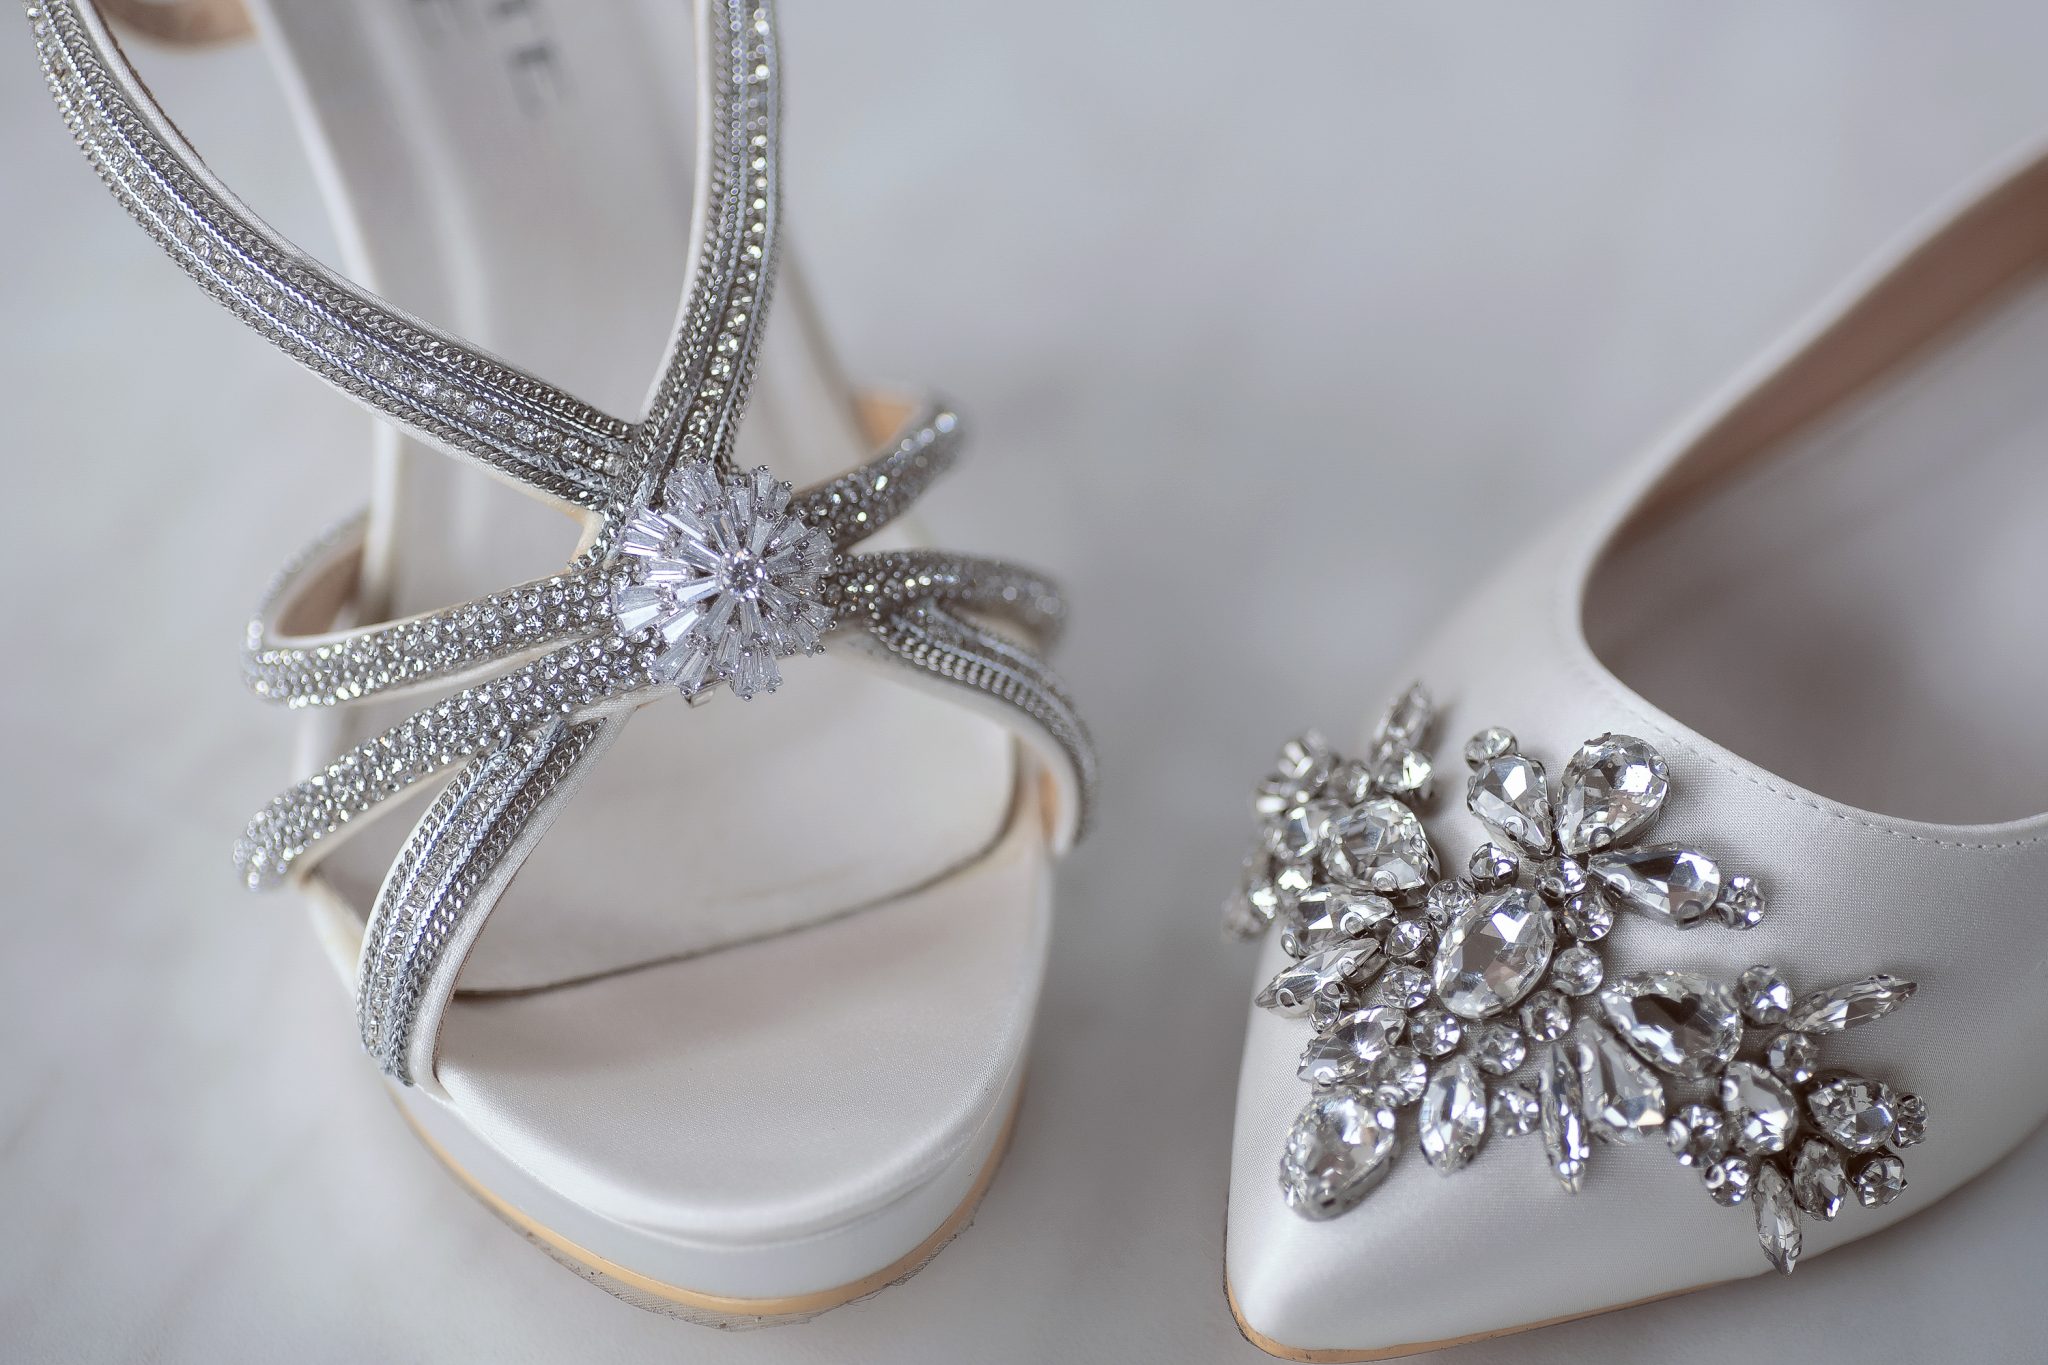 Choosing bridal shoes | Bridal shoes, the Do's & Don'ts | Jeanette Maree